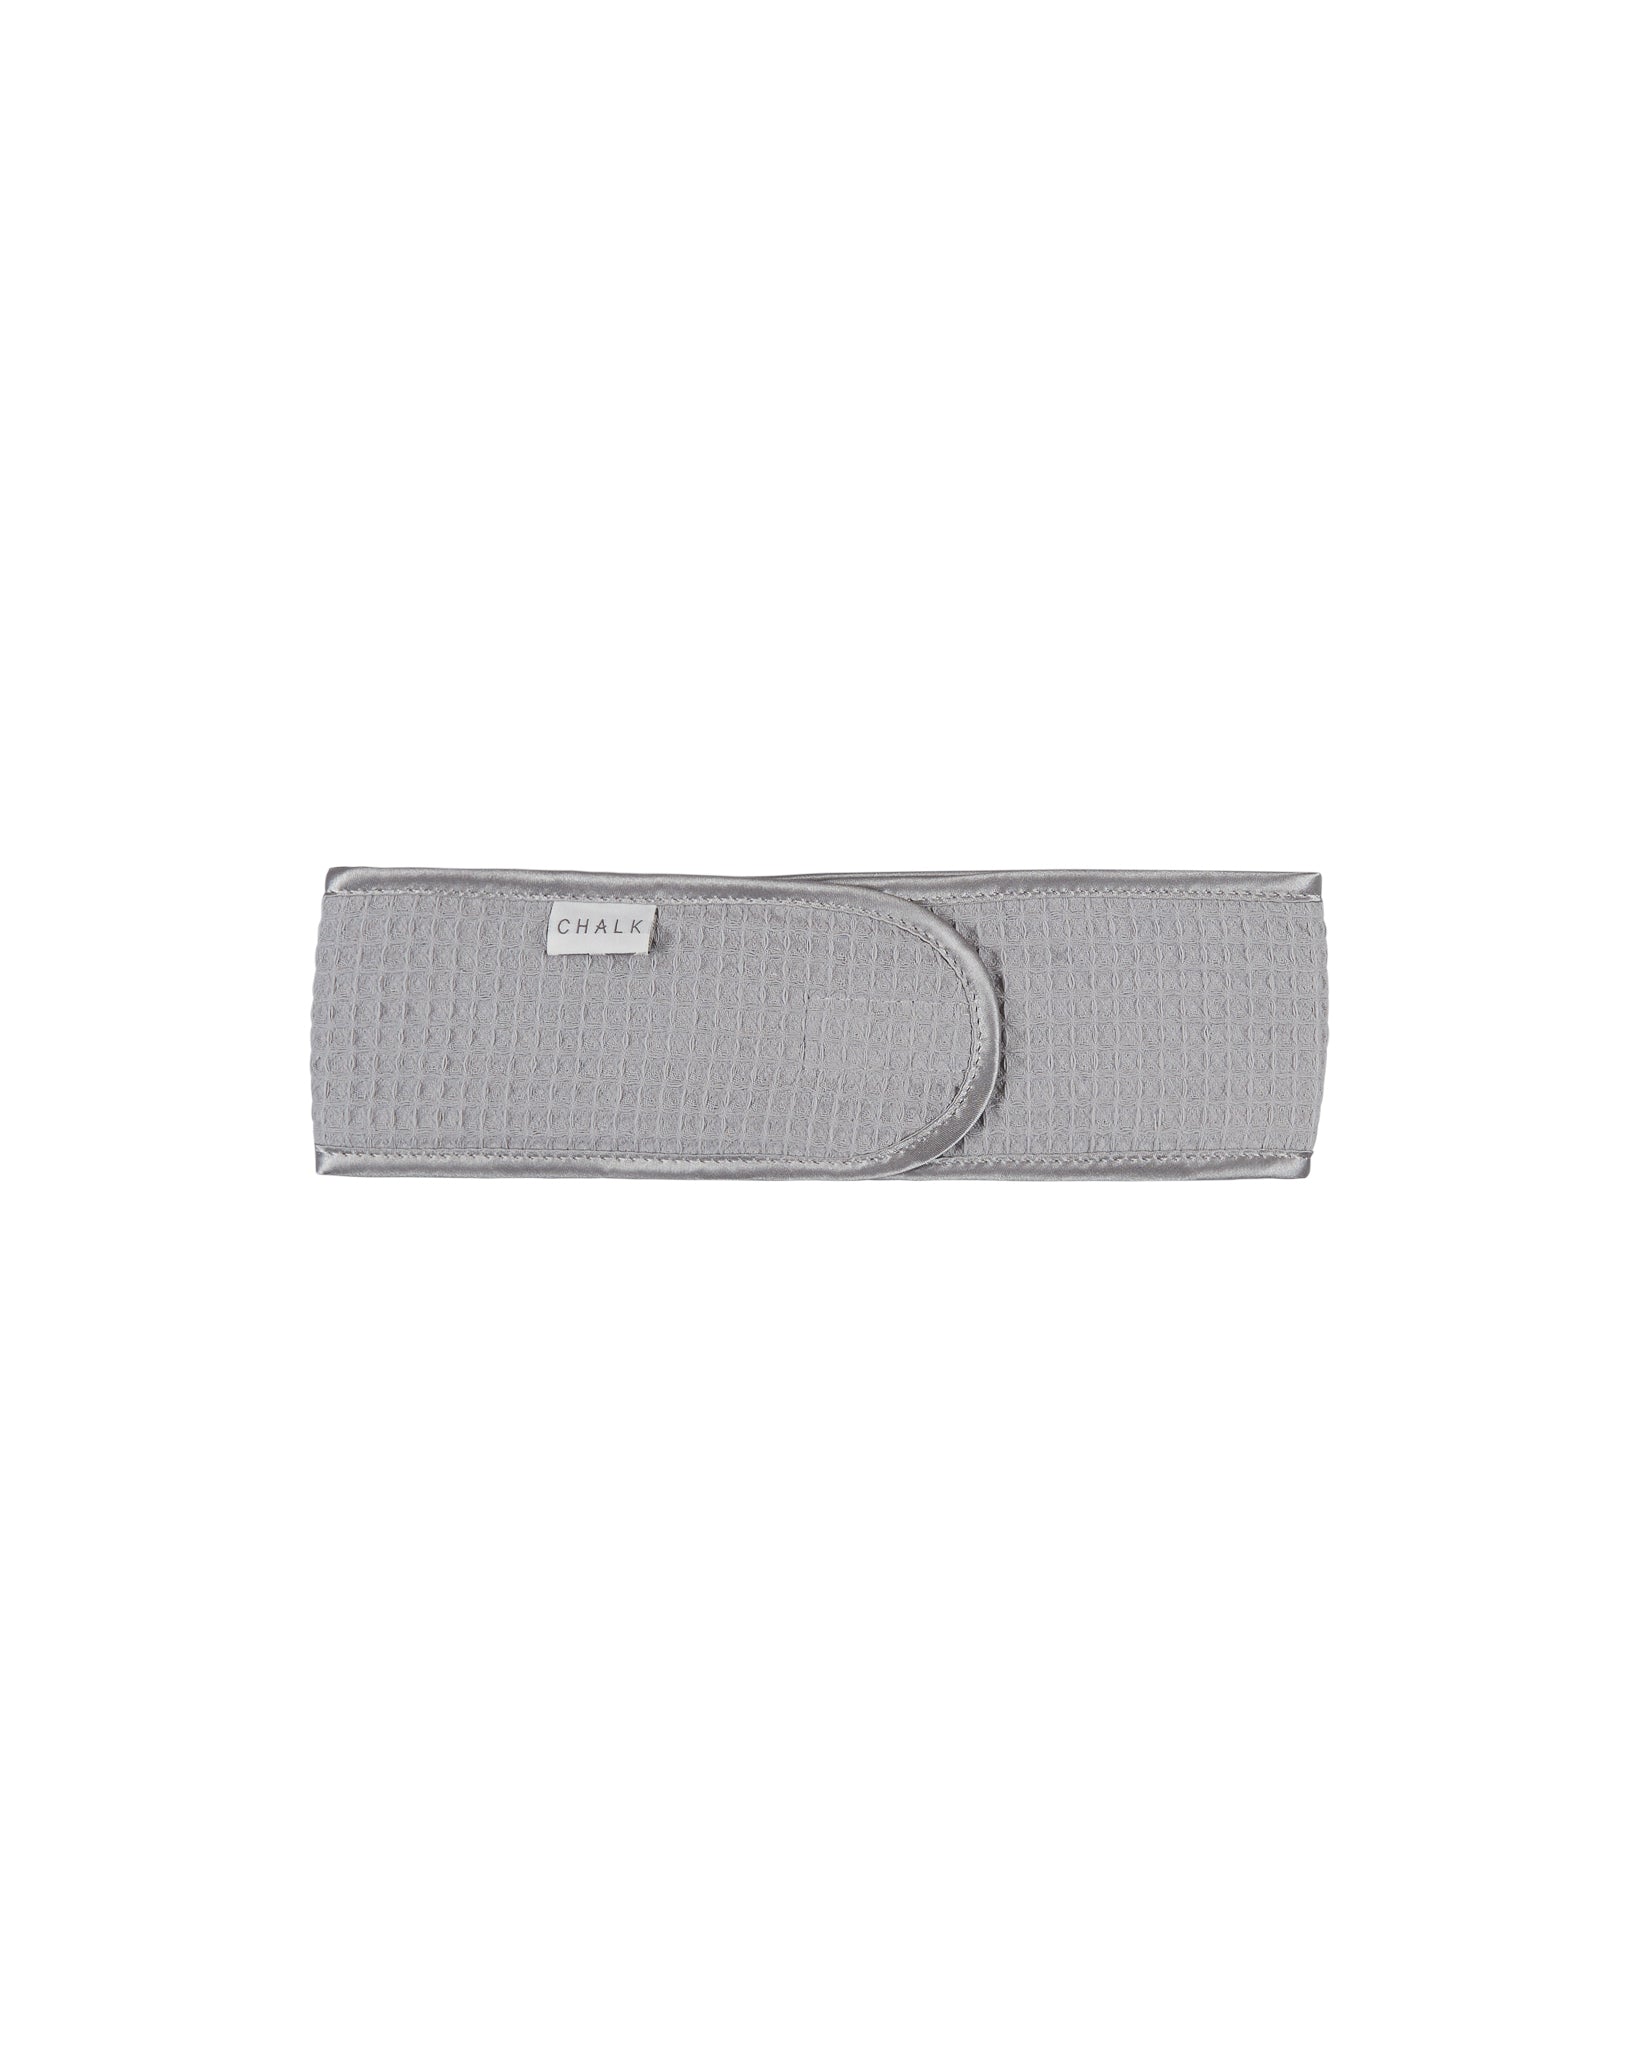 Grey waffle headband by Chalk, designed for convenience during skincare routines, makeup removal, and keeping hair back.